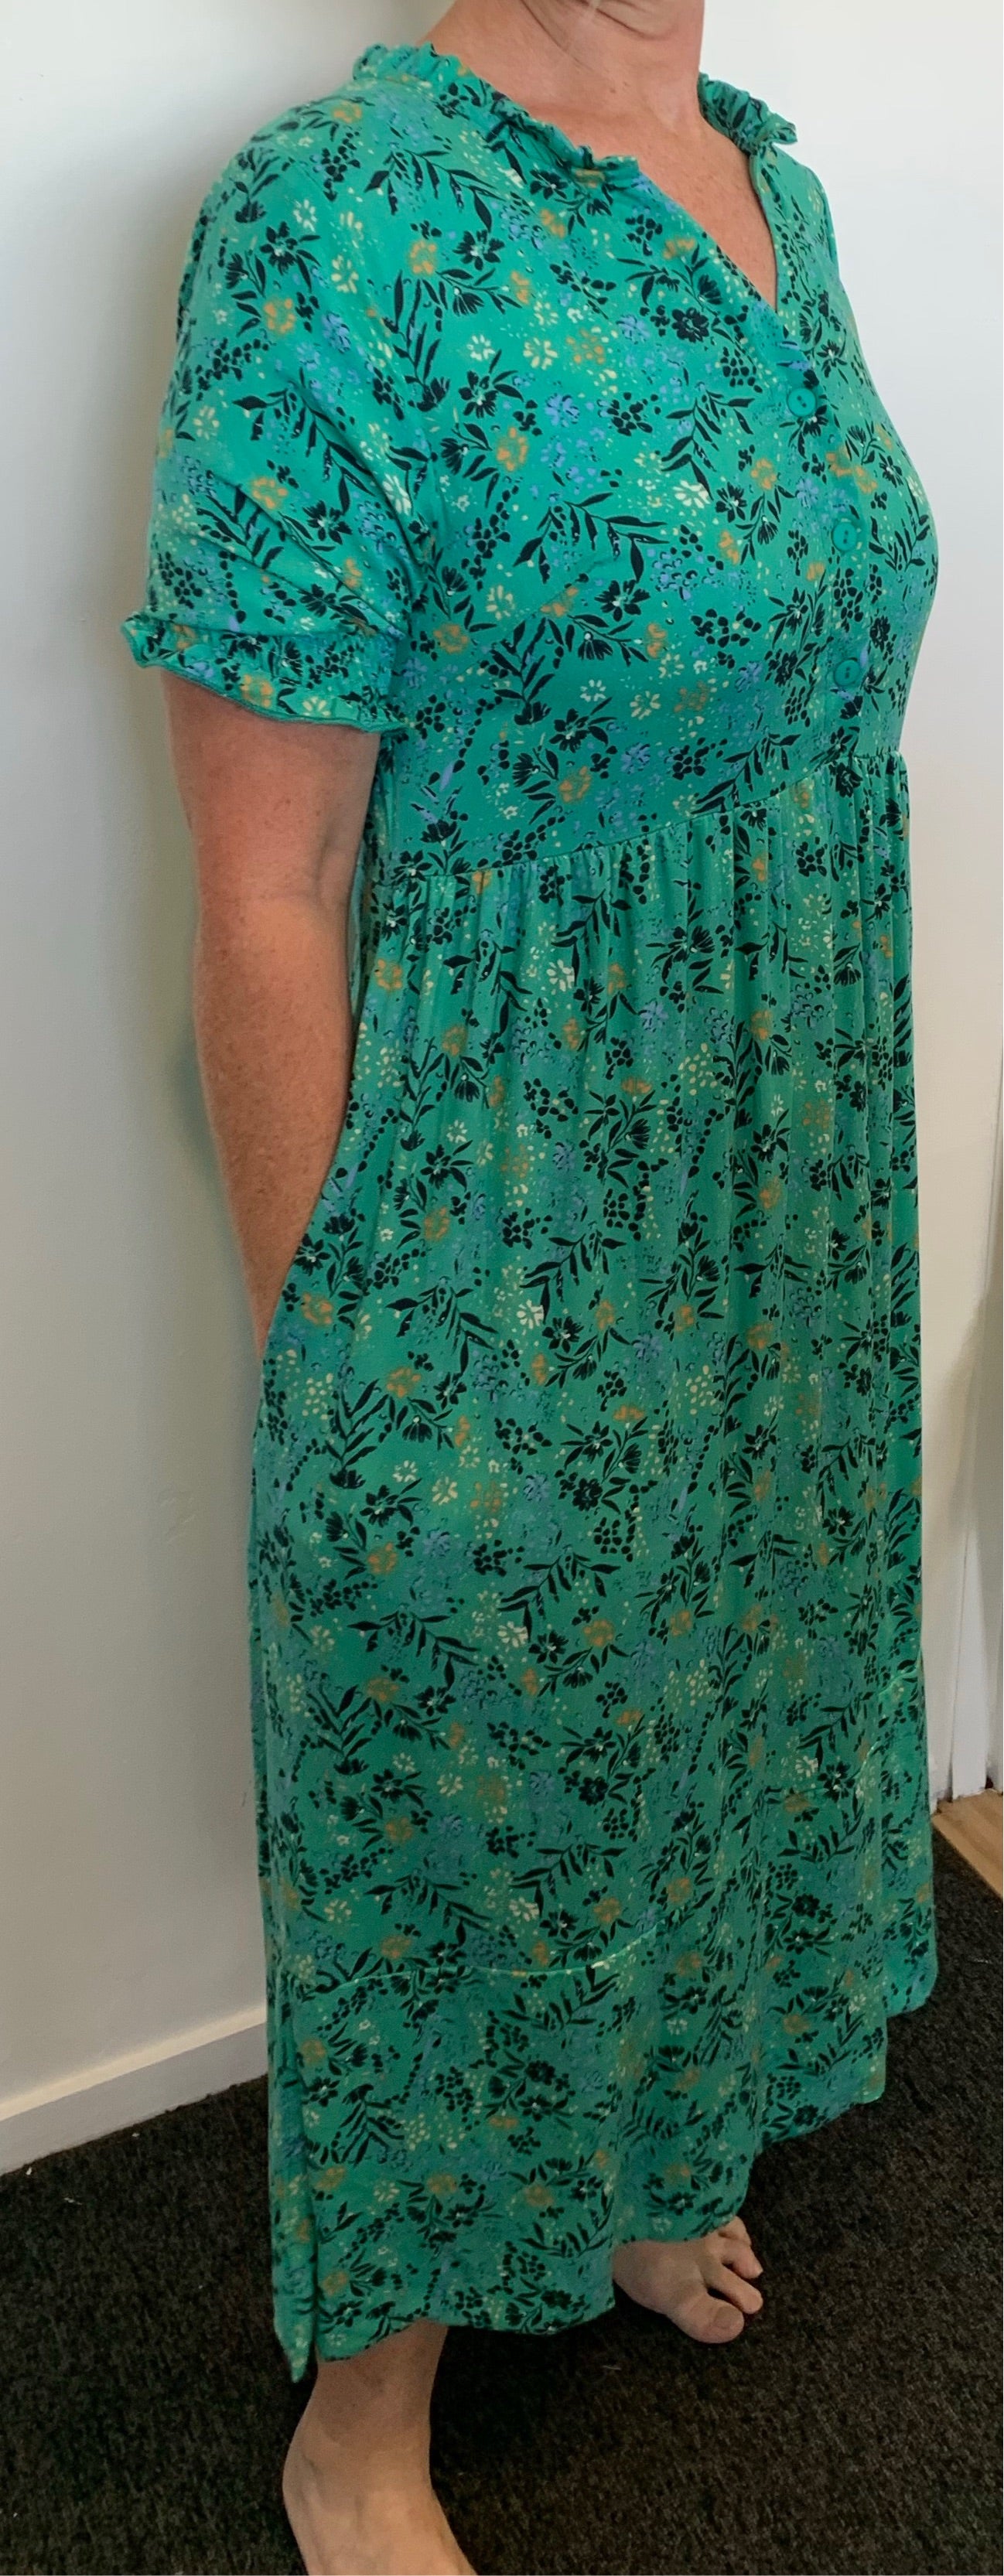 Teal Coloured A-Line Dress with Floral Print Pockets & Frill Neck - Silver Wishes